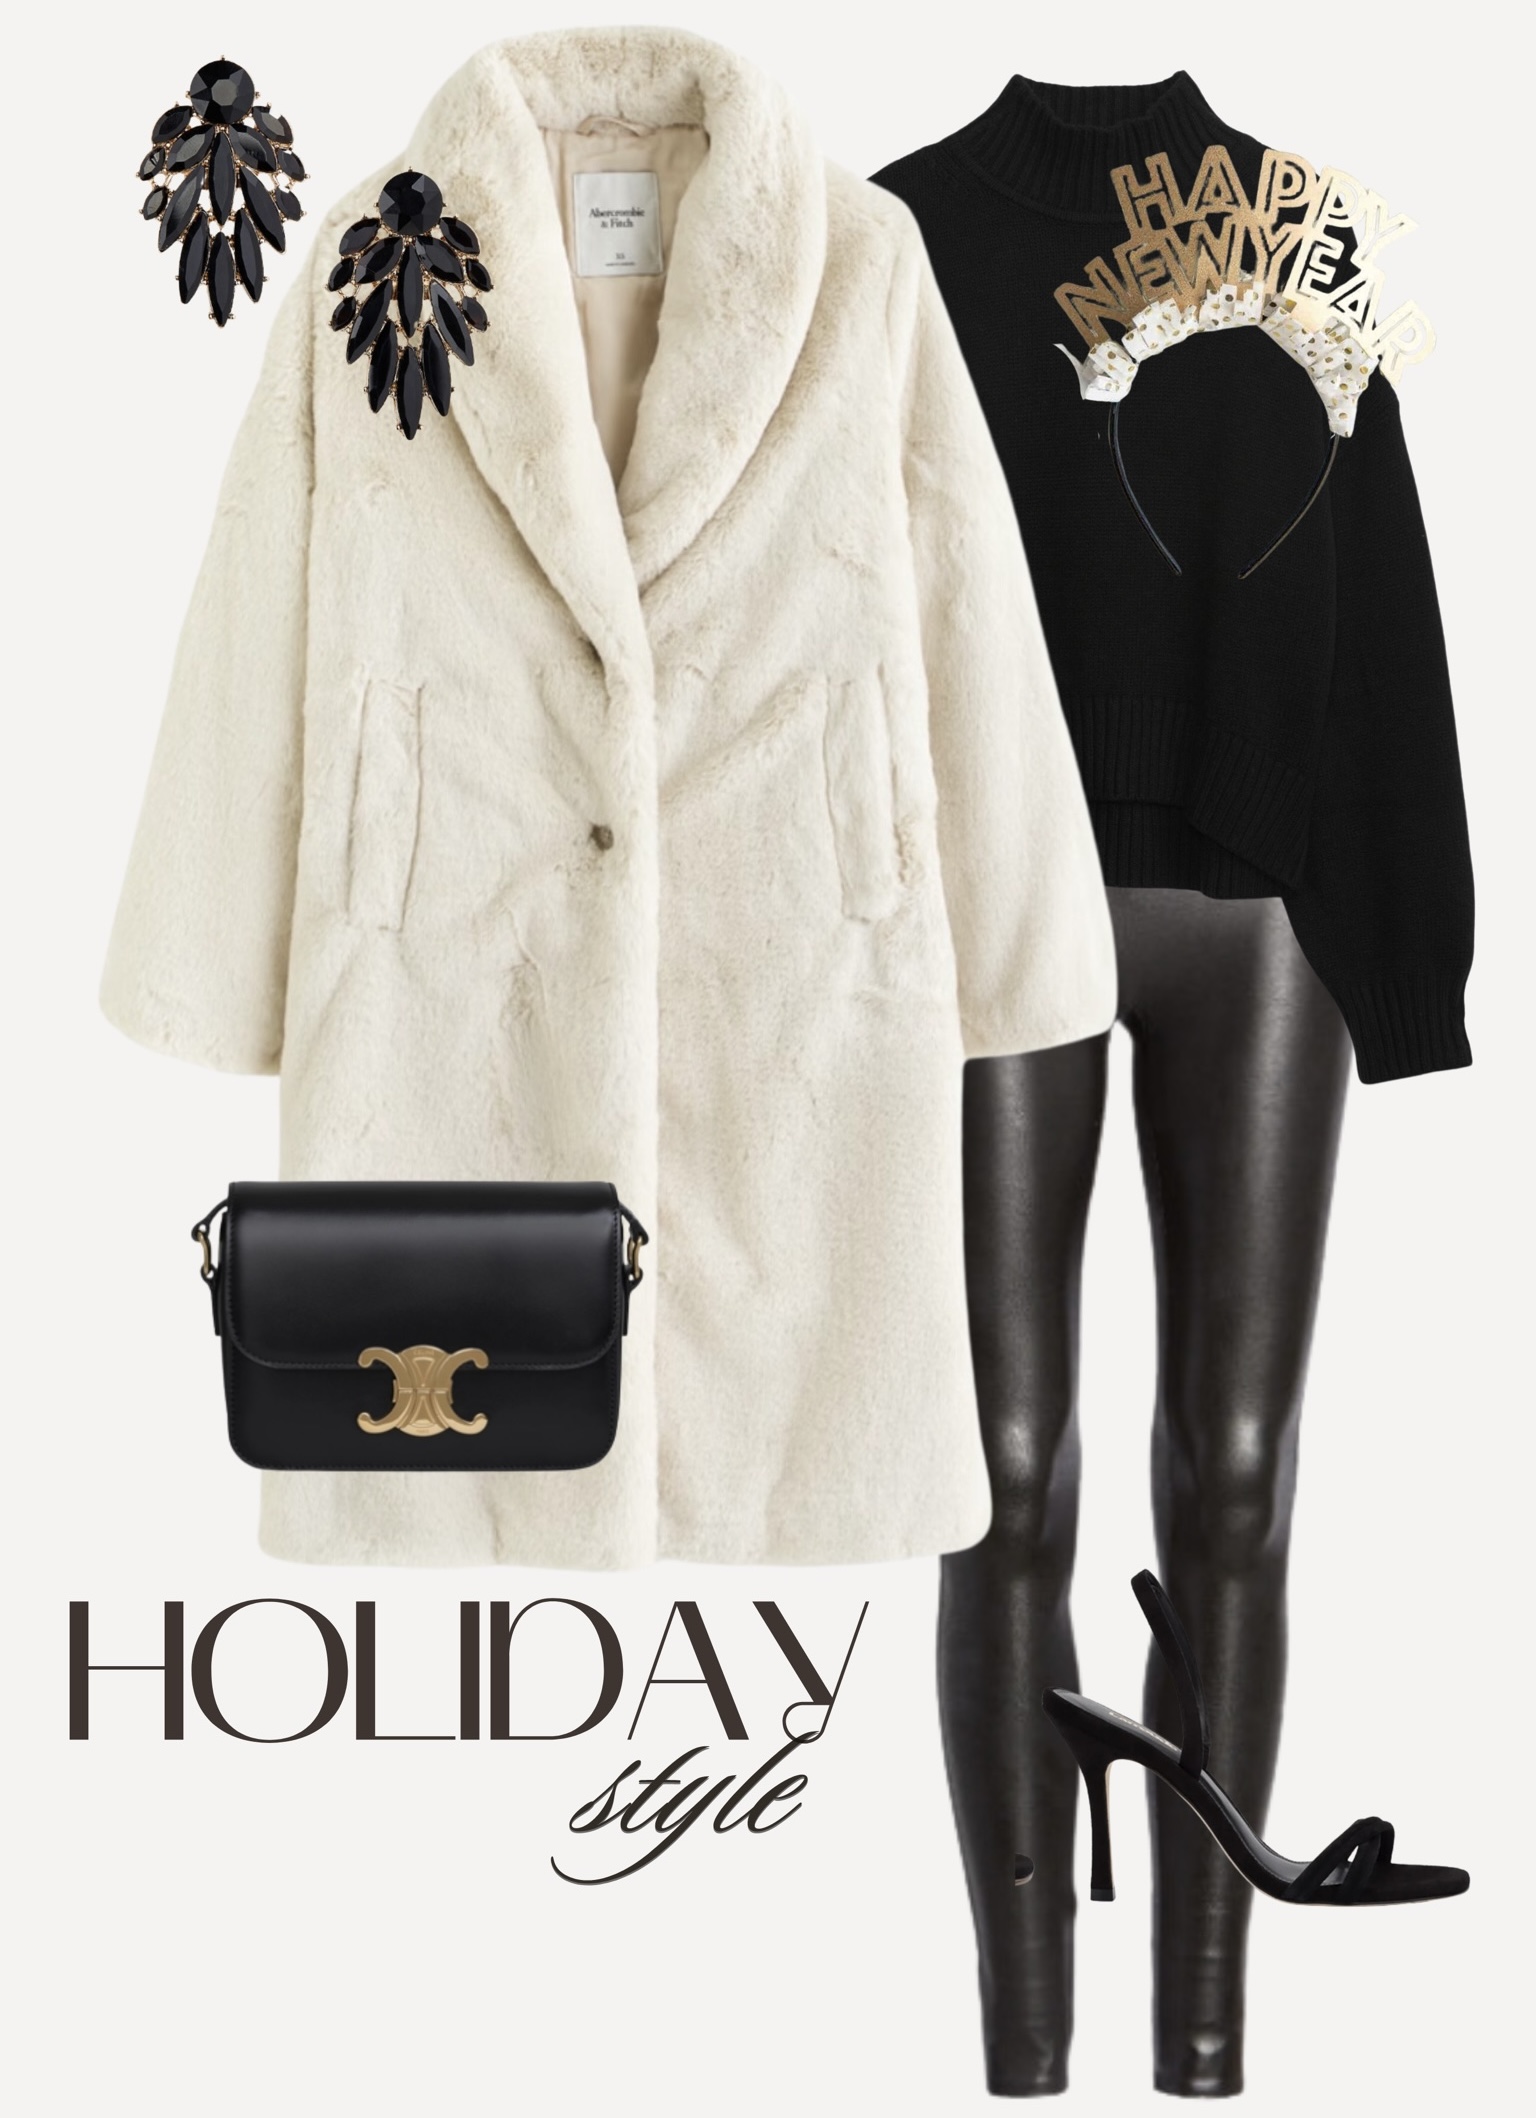 NYE styled looks 12/3 - Stylin by Aylin